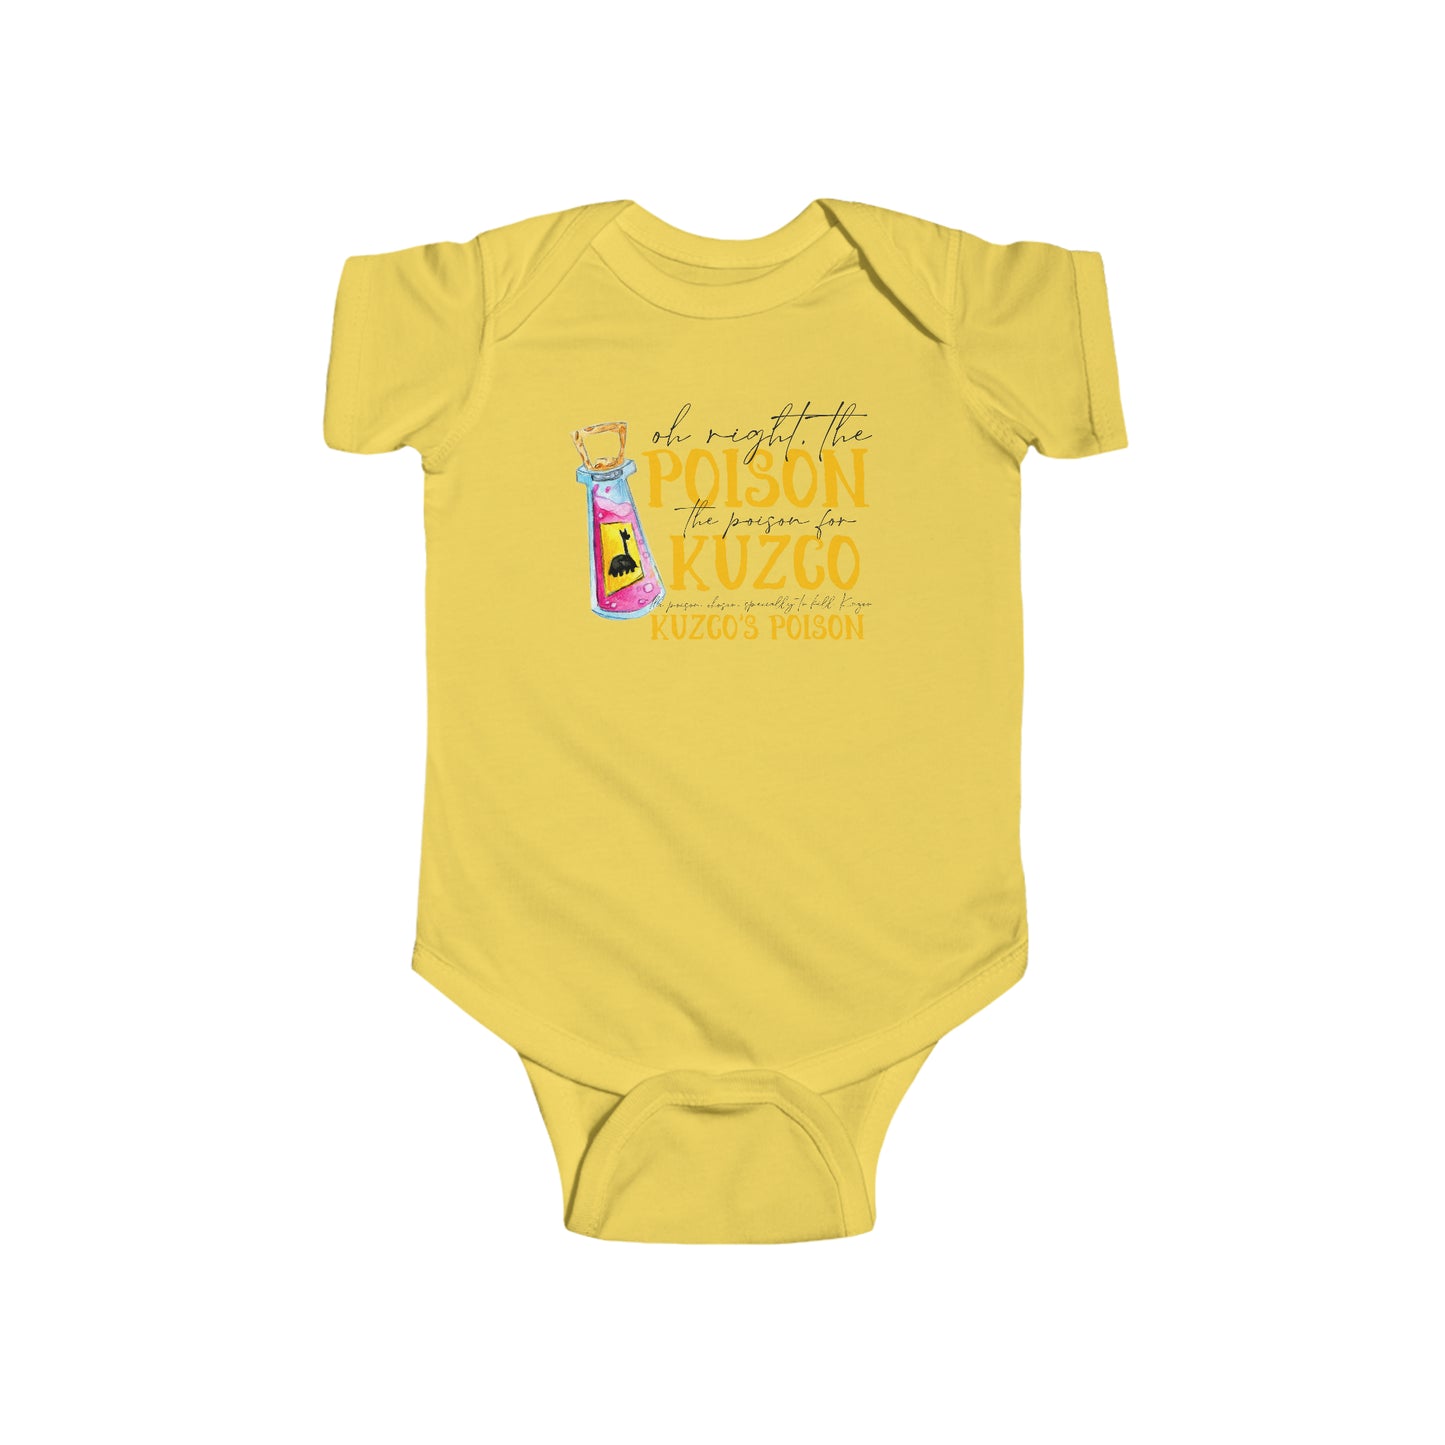 Oh Right The Poison Rabbit Skins Infant Fine Jersey Bodysuit